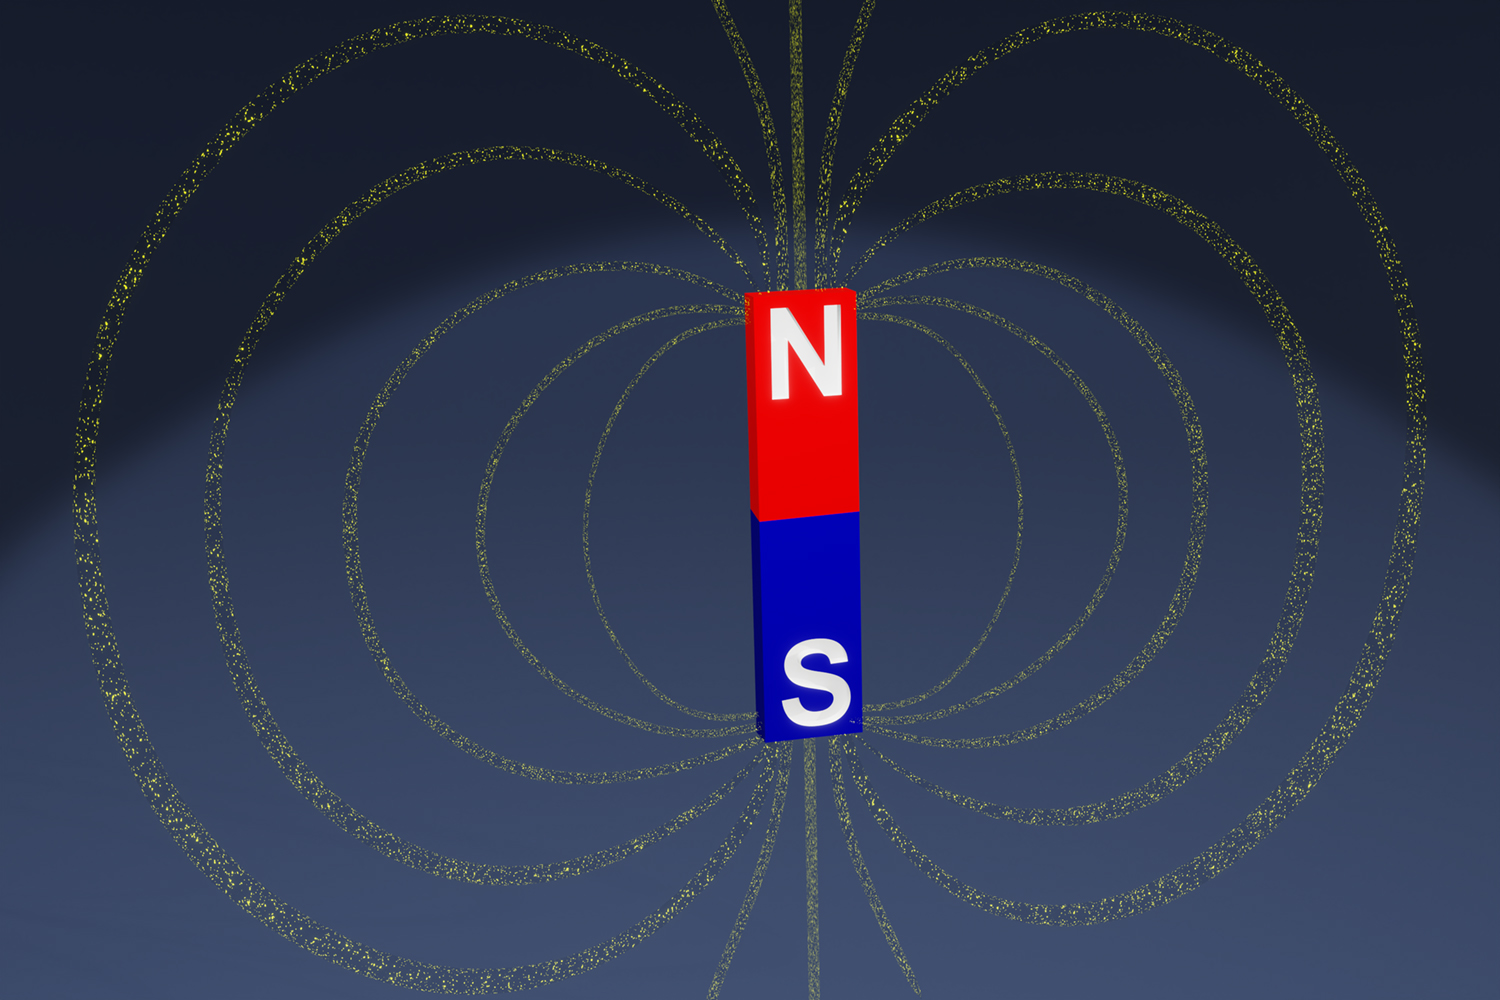 A 3D computer rendering shows a bar magnet. To show its north and south poles, respectively, its upper half is red and labeled with an “N,” while its lower half is blue and labeled with an “S.” Yellow loops emanate from the magnet, representing its magnetic field.